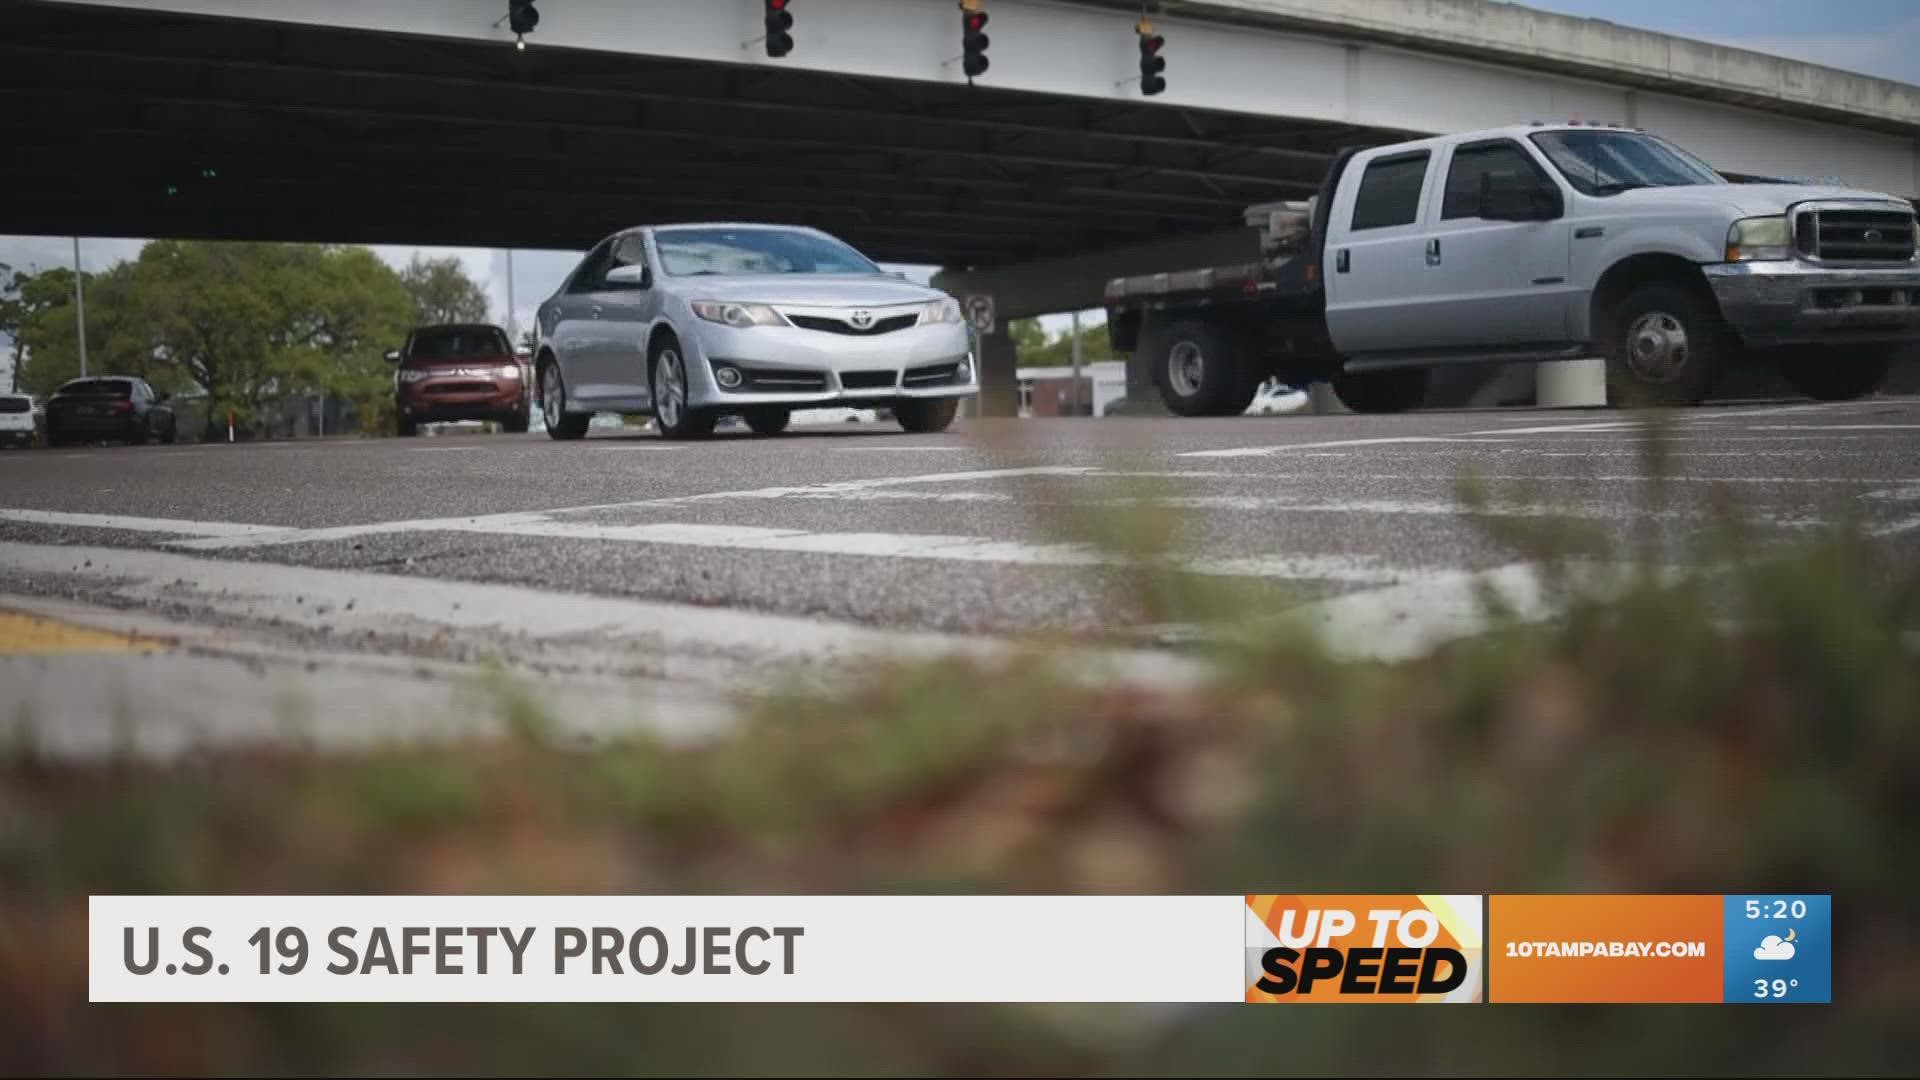 The project is expected to make it safer for foot traffic in the area.